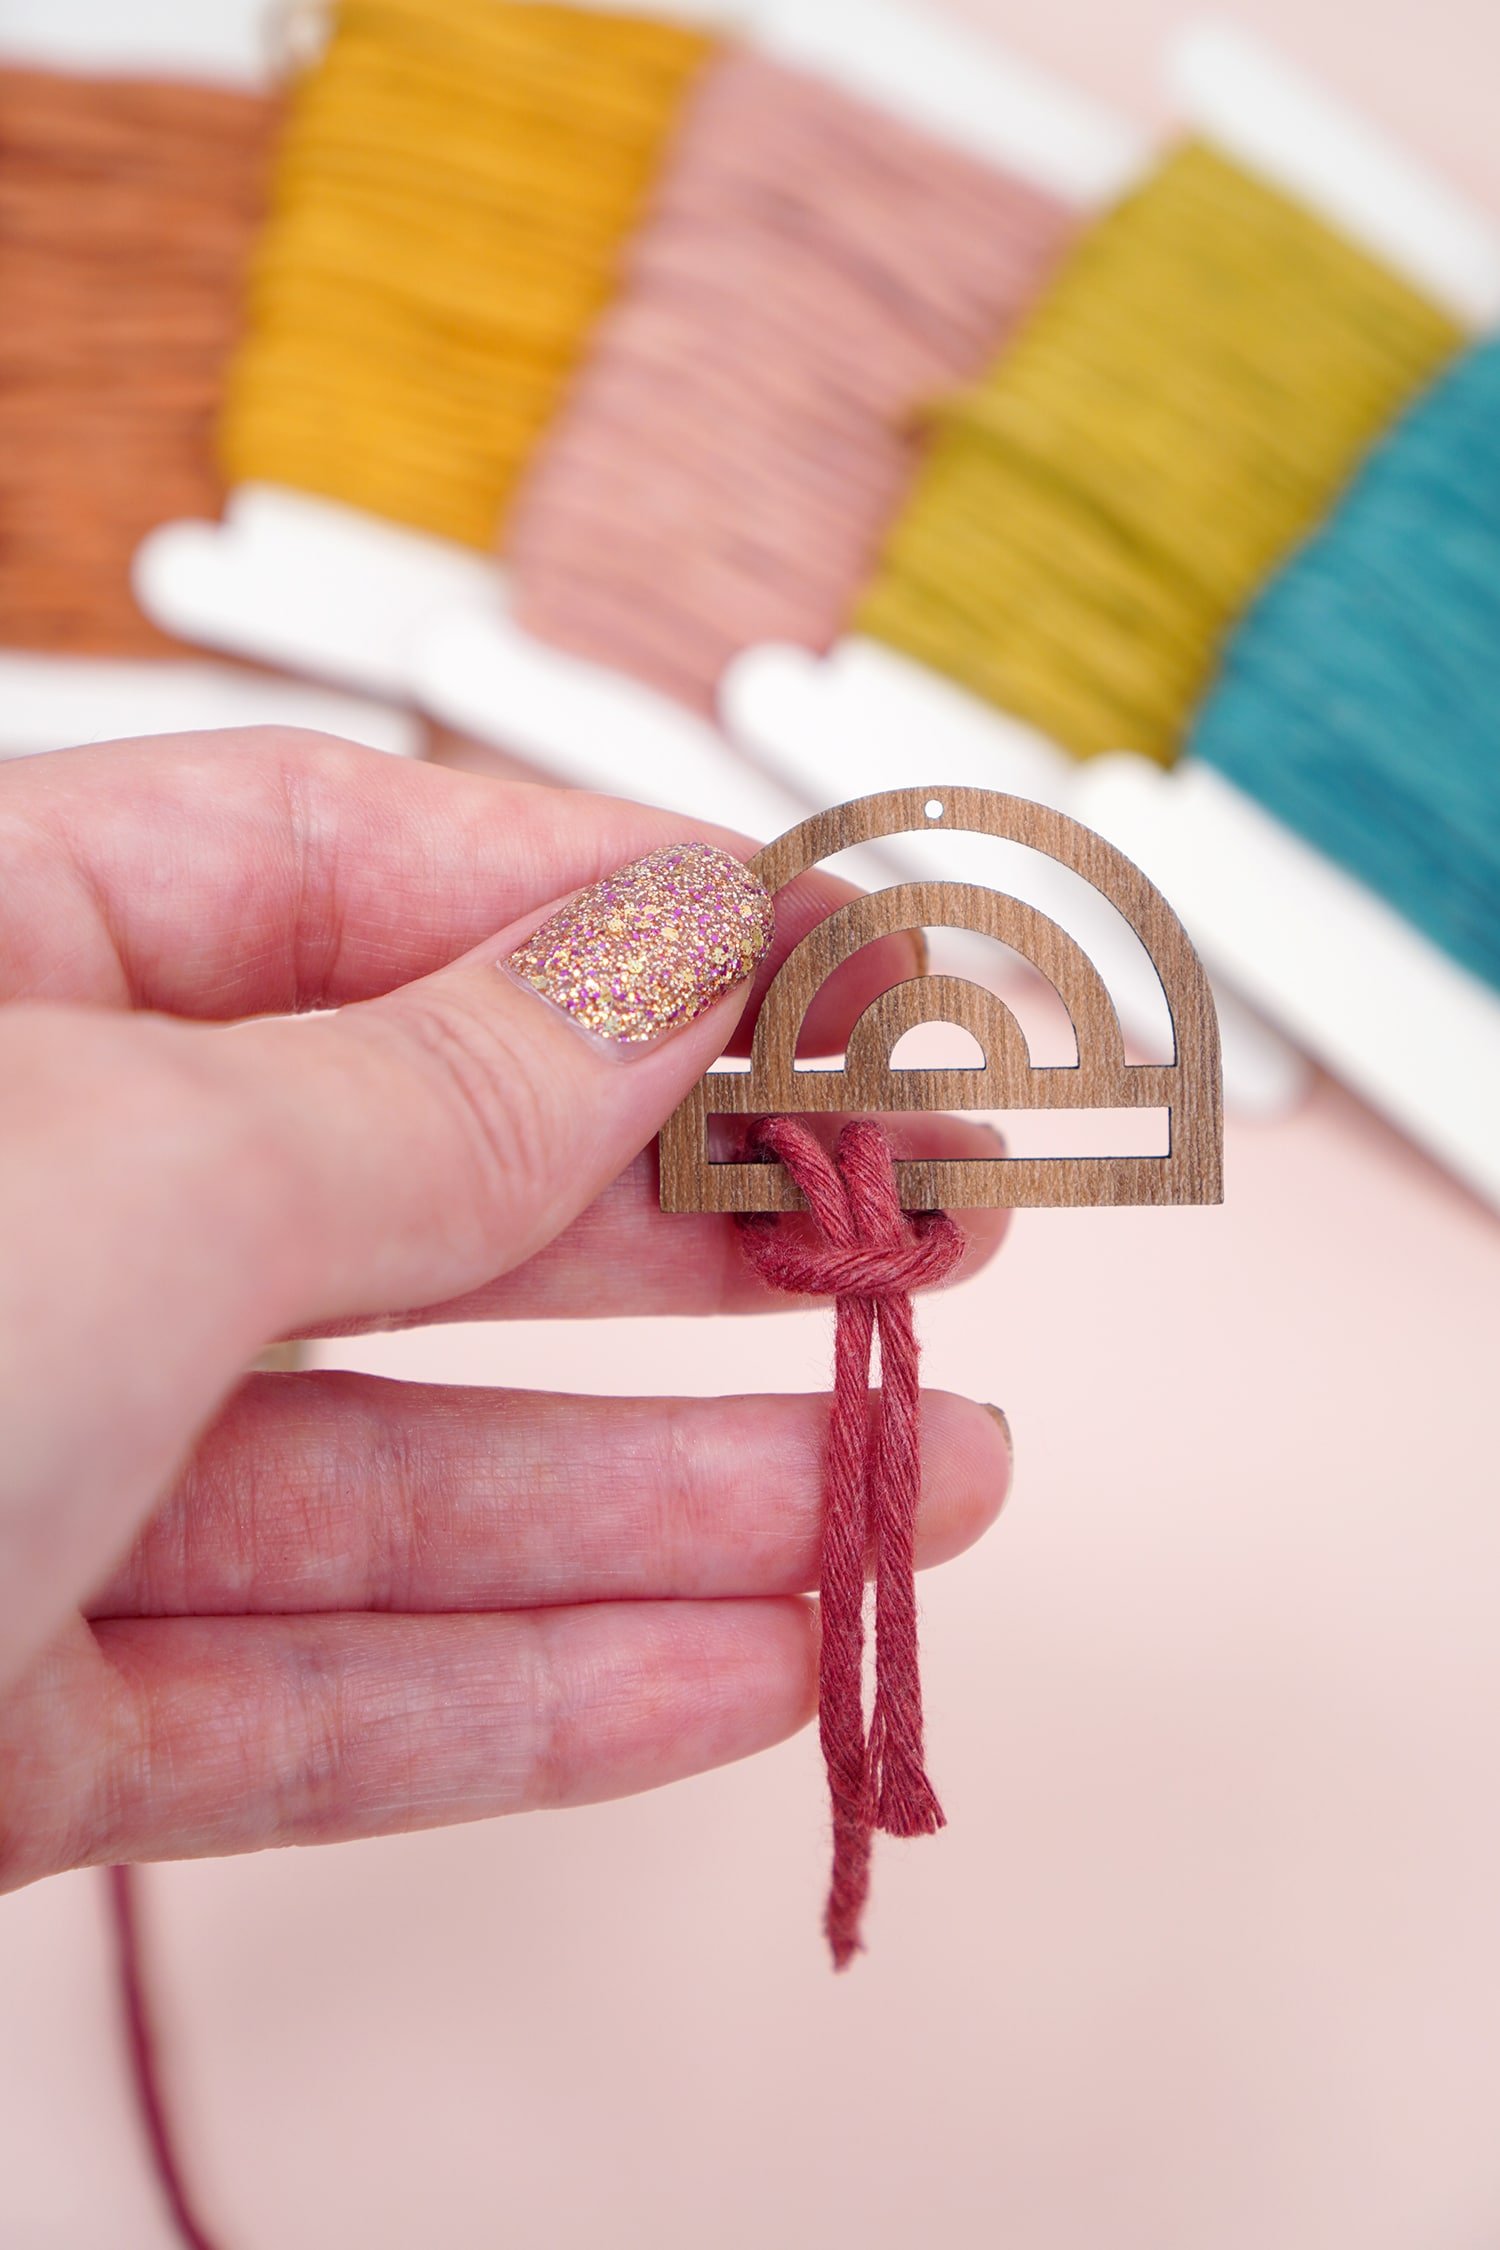 Hand attaching macrame cord to a wooden rainbow earring with macrame cord in background